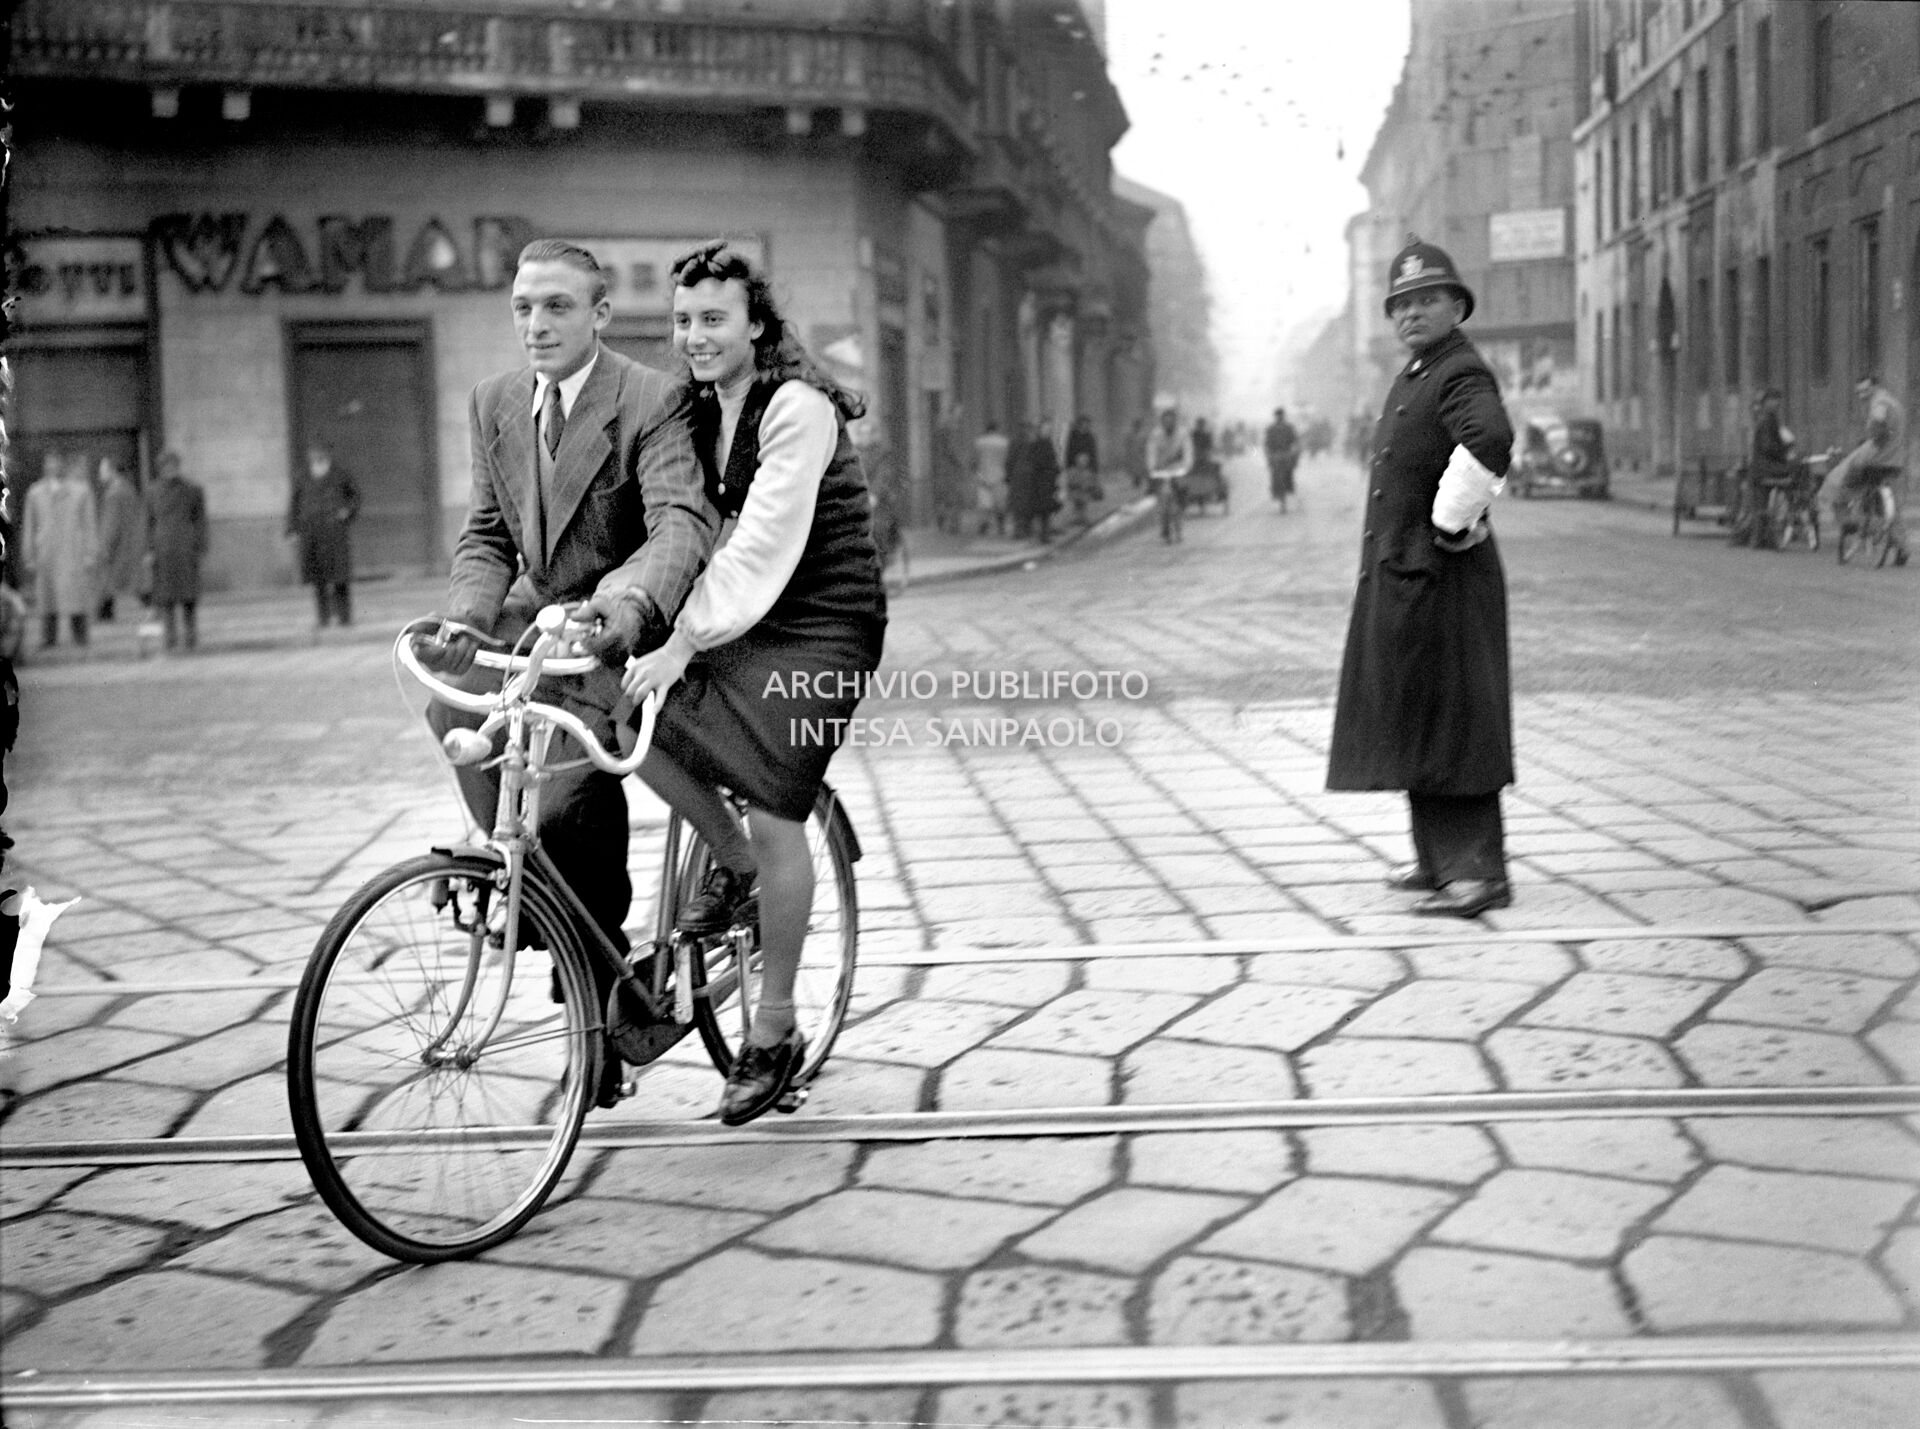 A man and woman on a special bicycle with two parallel seats in Milan